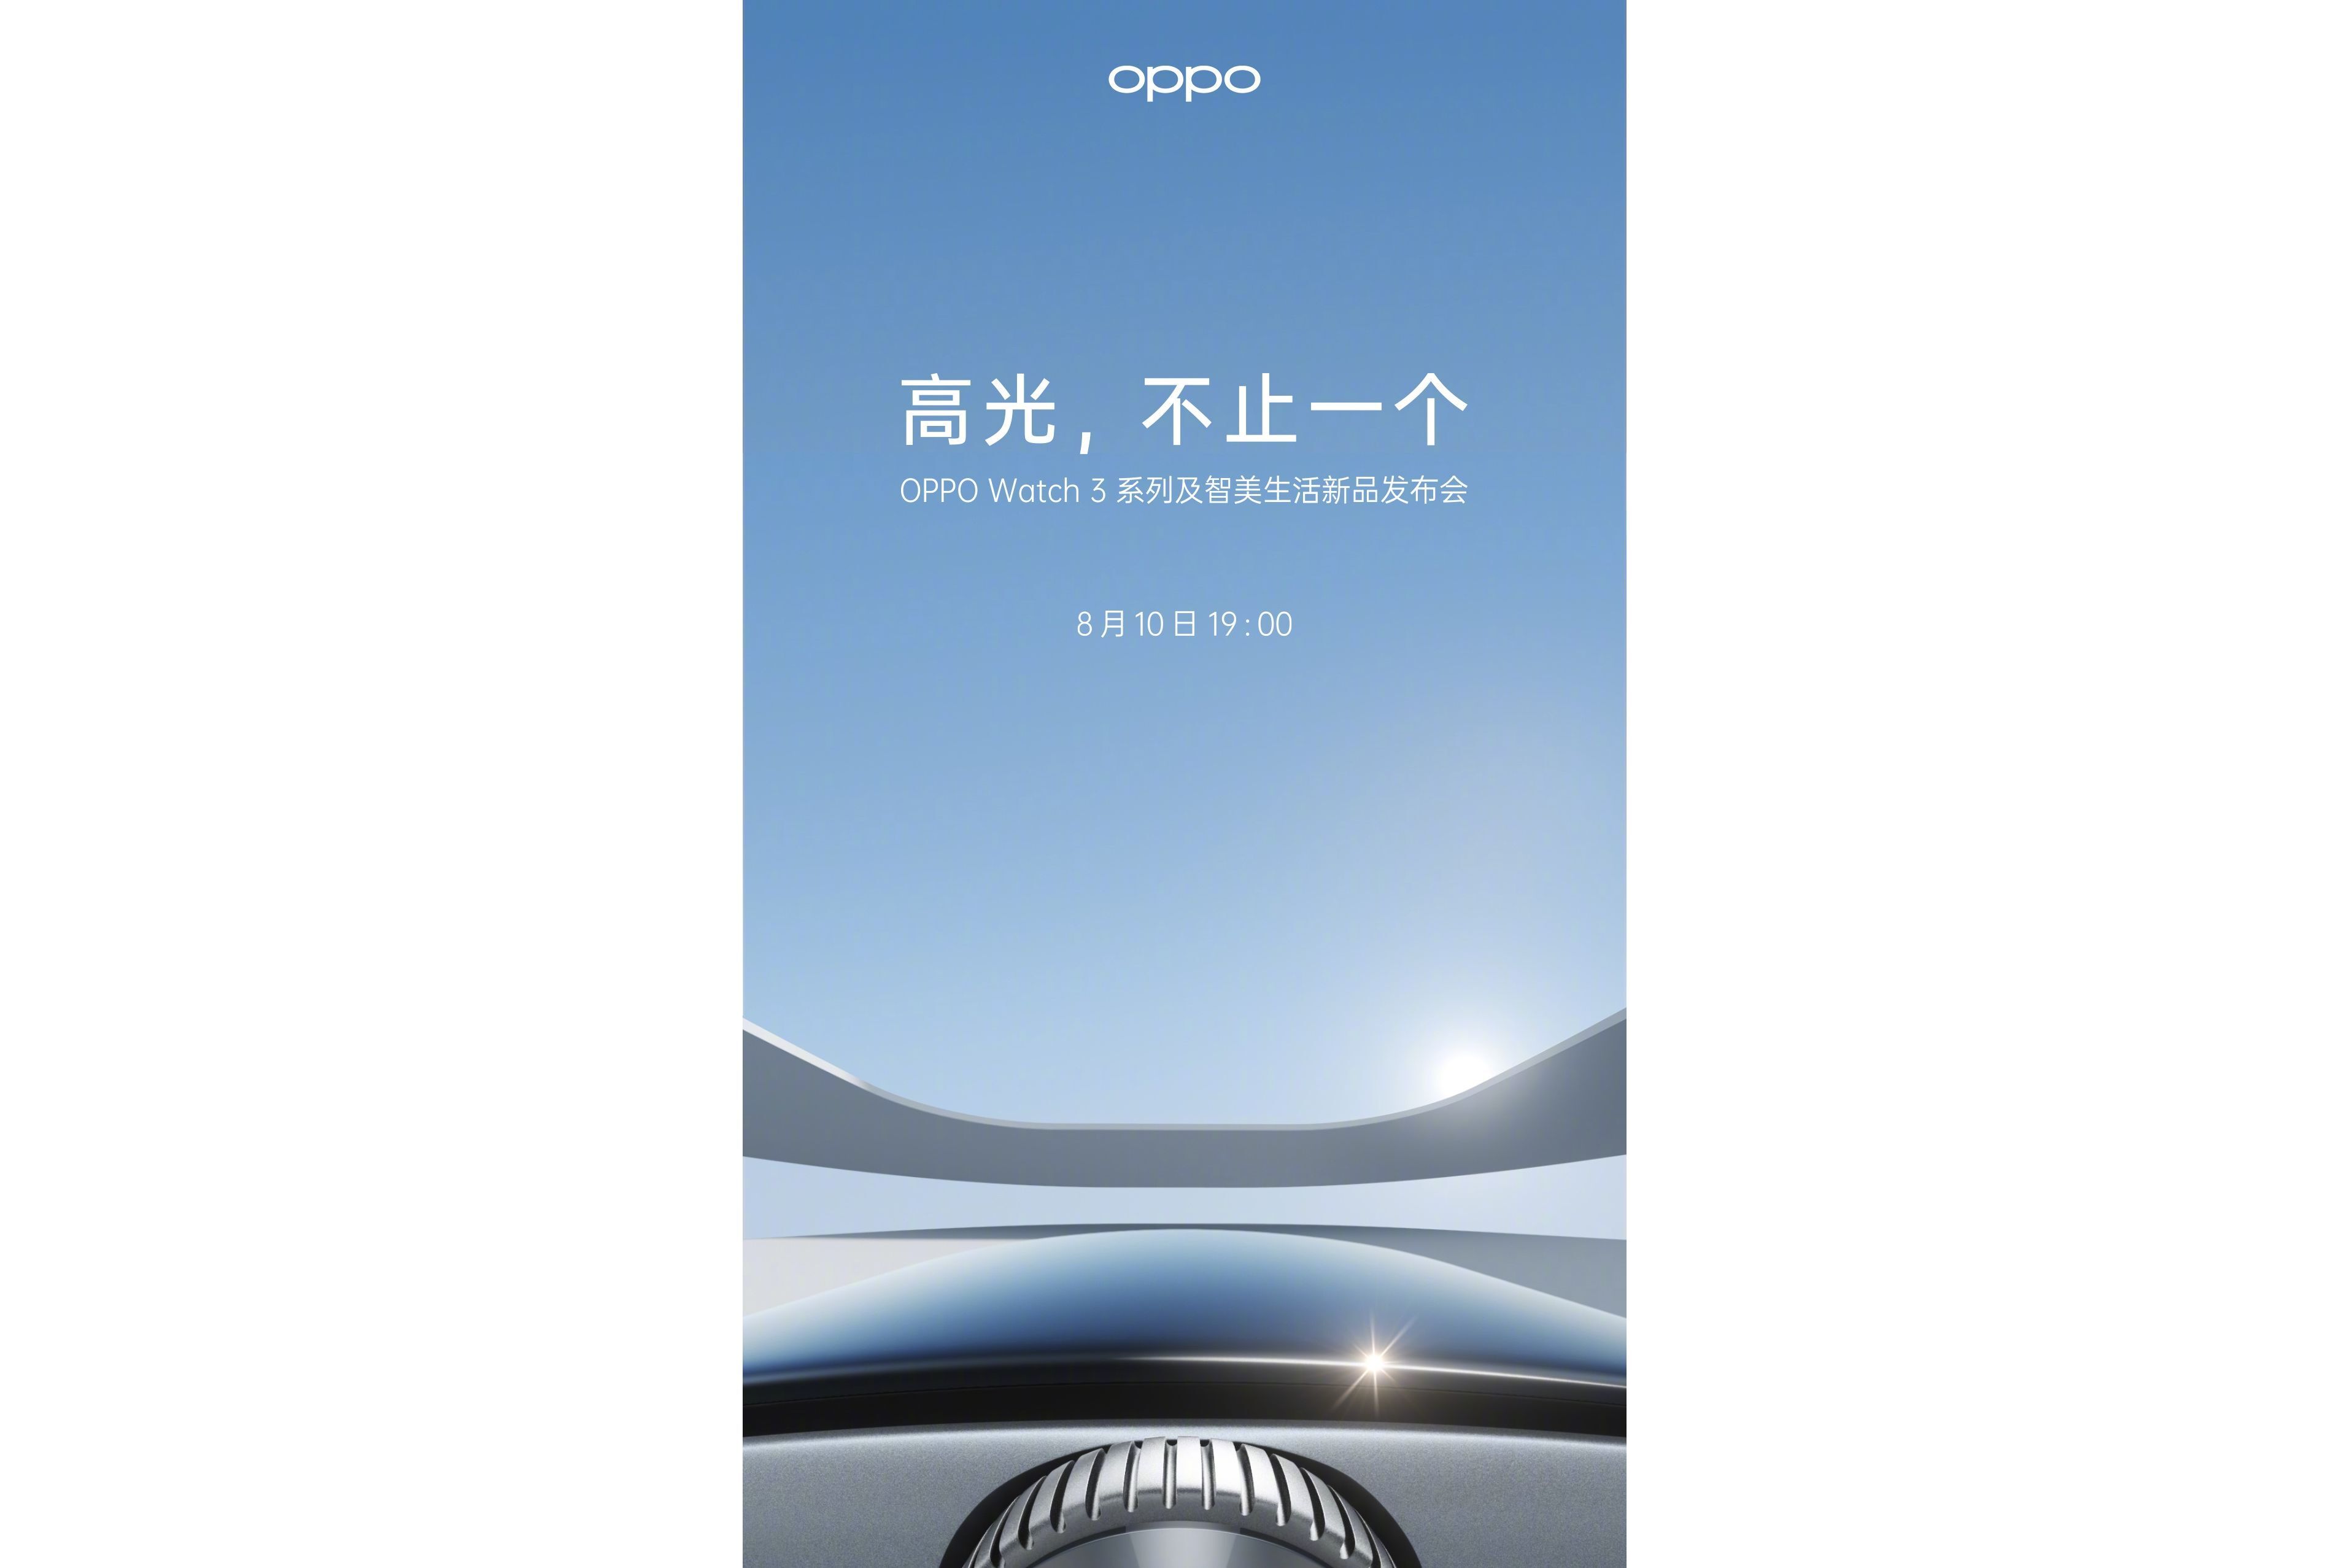 The official teaser for the Oppo Watch 3 series - The Snapdragon W5 Gen 1 powered Oppo Watch3 arriving on August 10